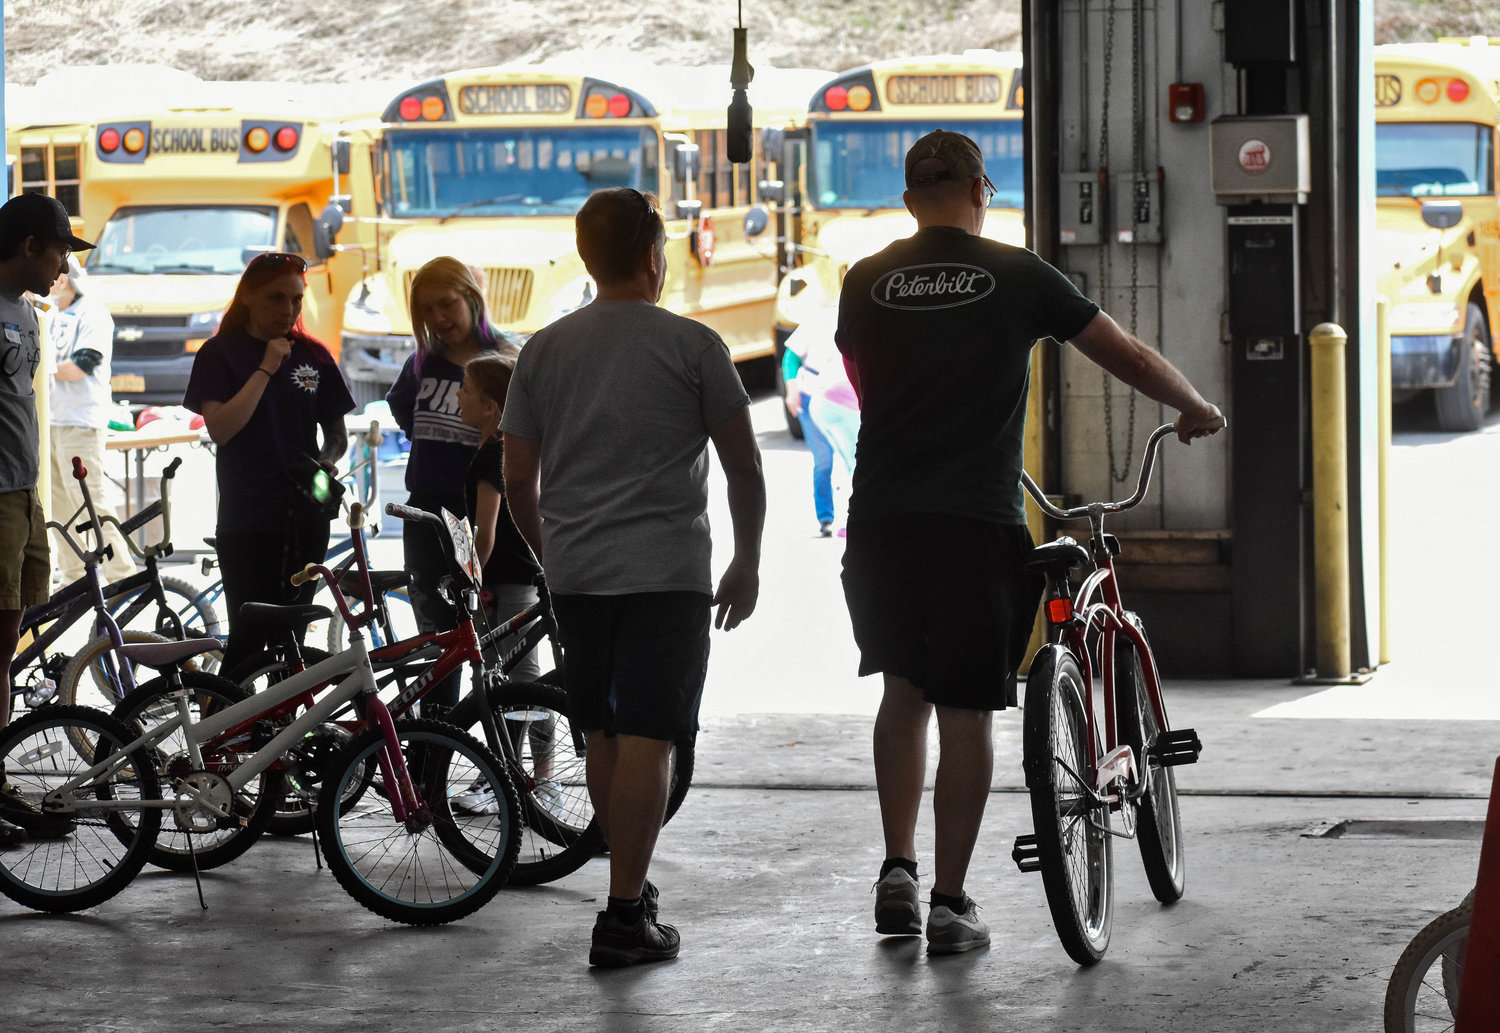 People young and old can benefit from owning a bike — to the left, a child picks from the selection at Community Bikes' distribution event. In the center, an adult takes his selected bike out for a test drive.